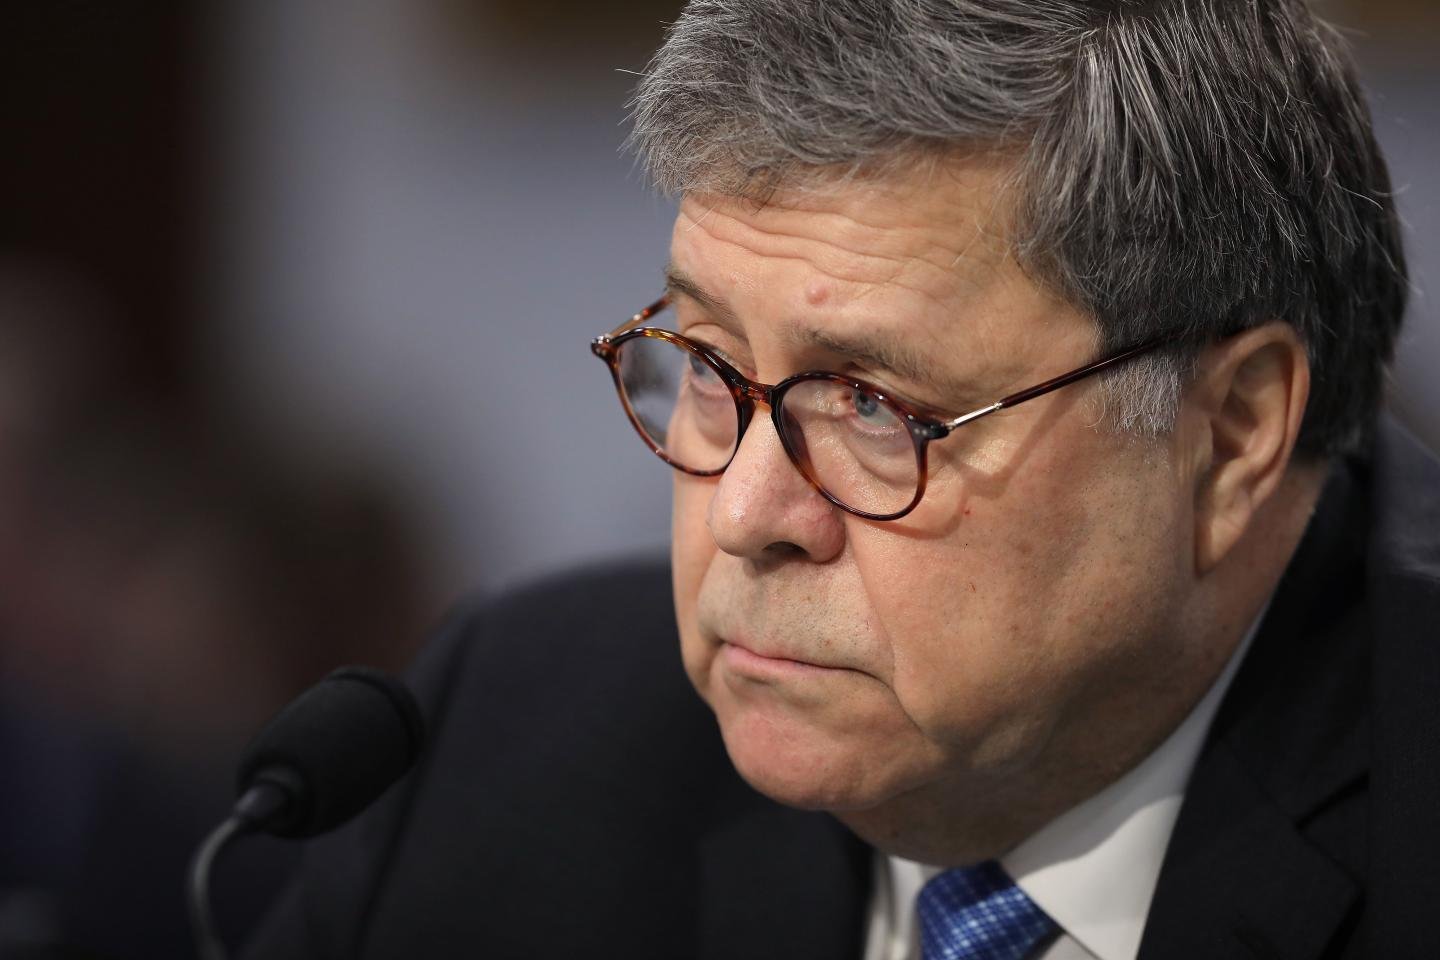 Attorney General Barr says he would favor making marijuana illegal across the United States